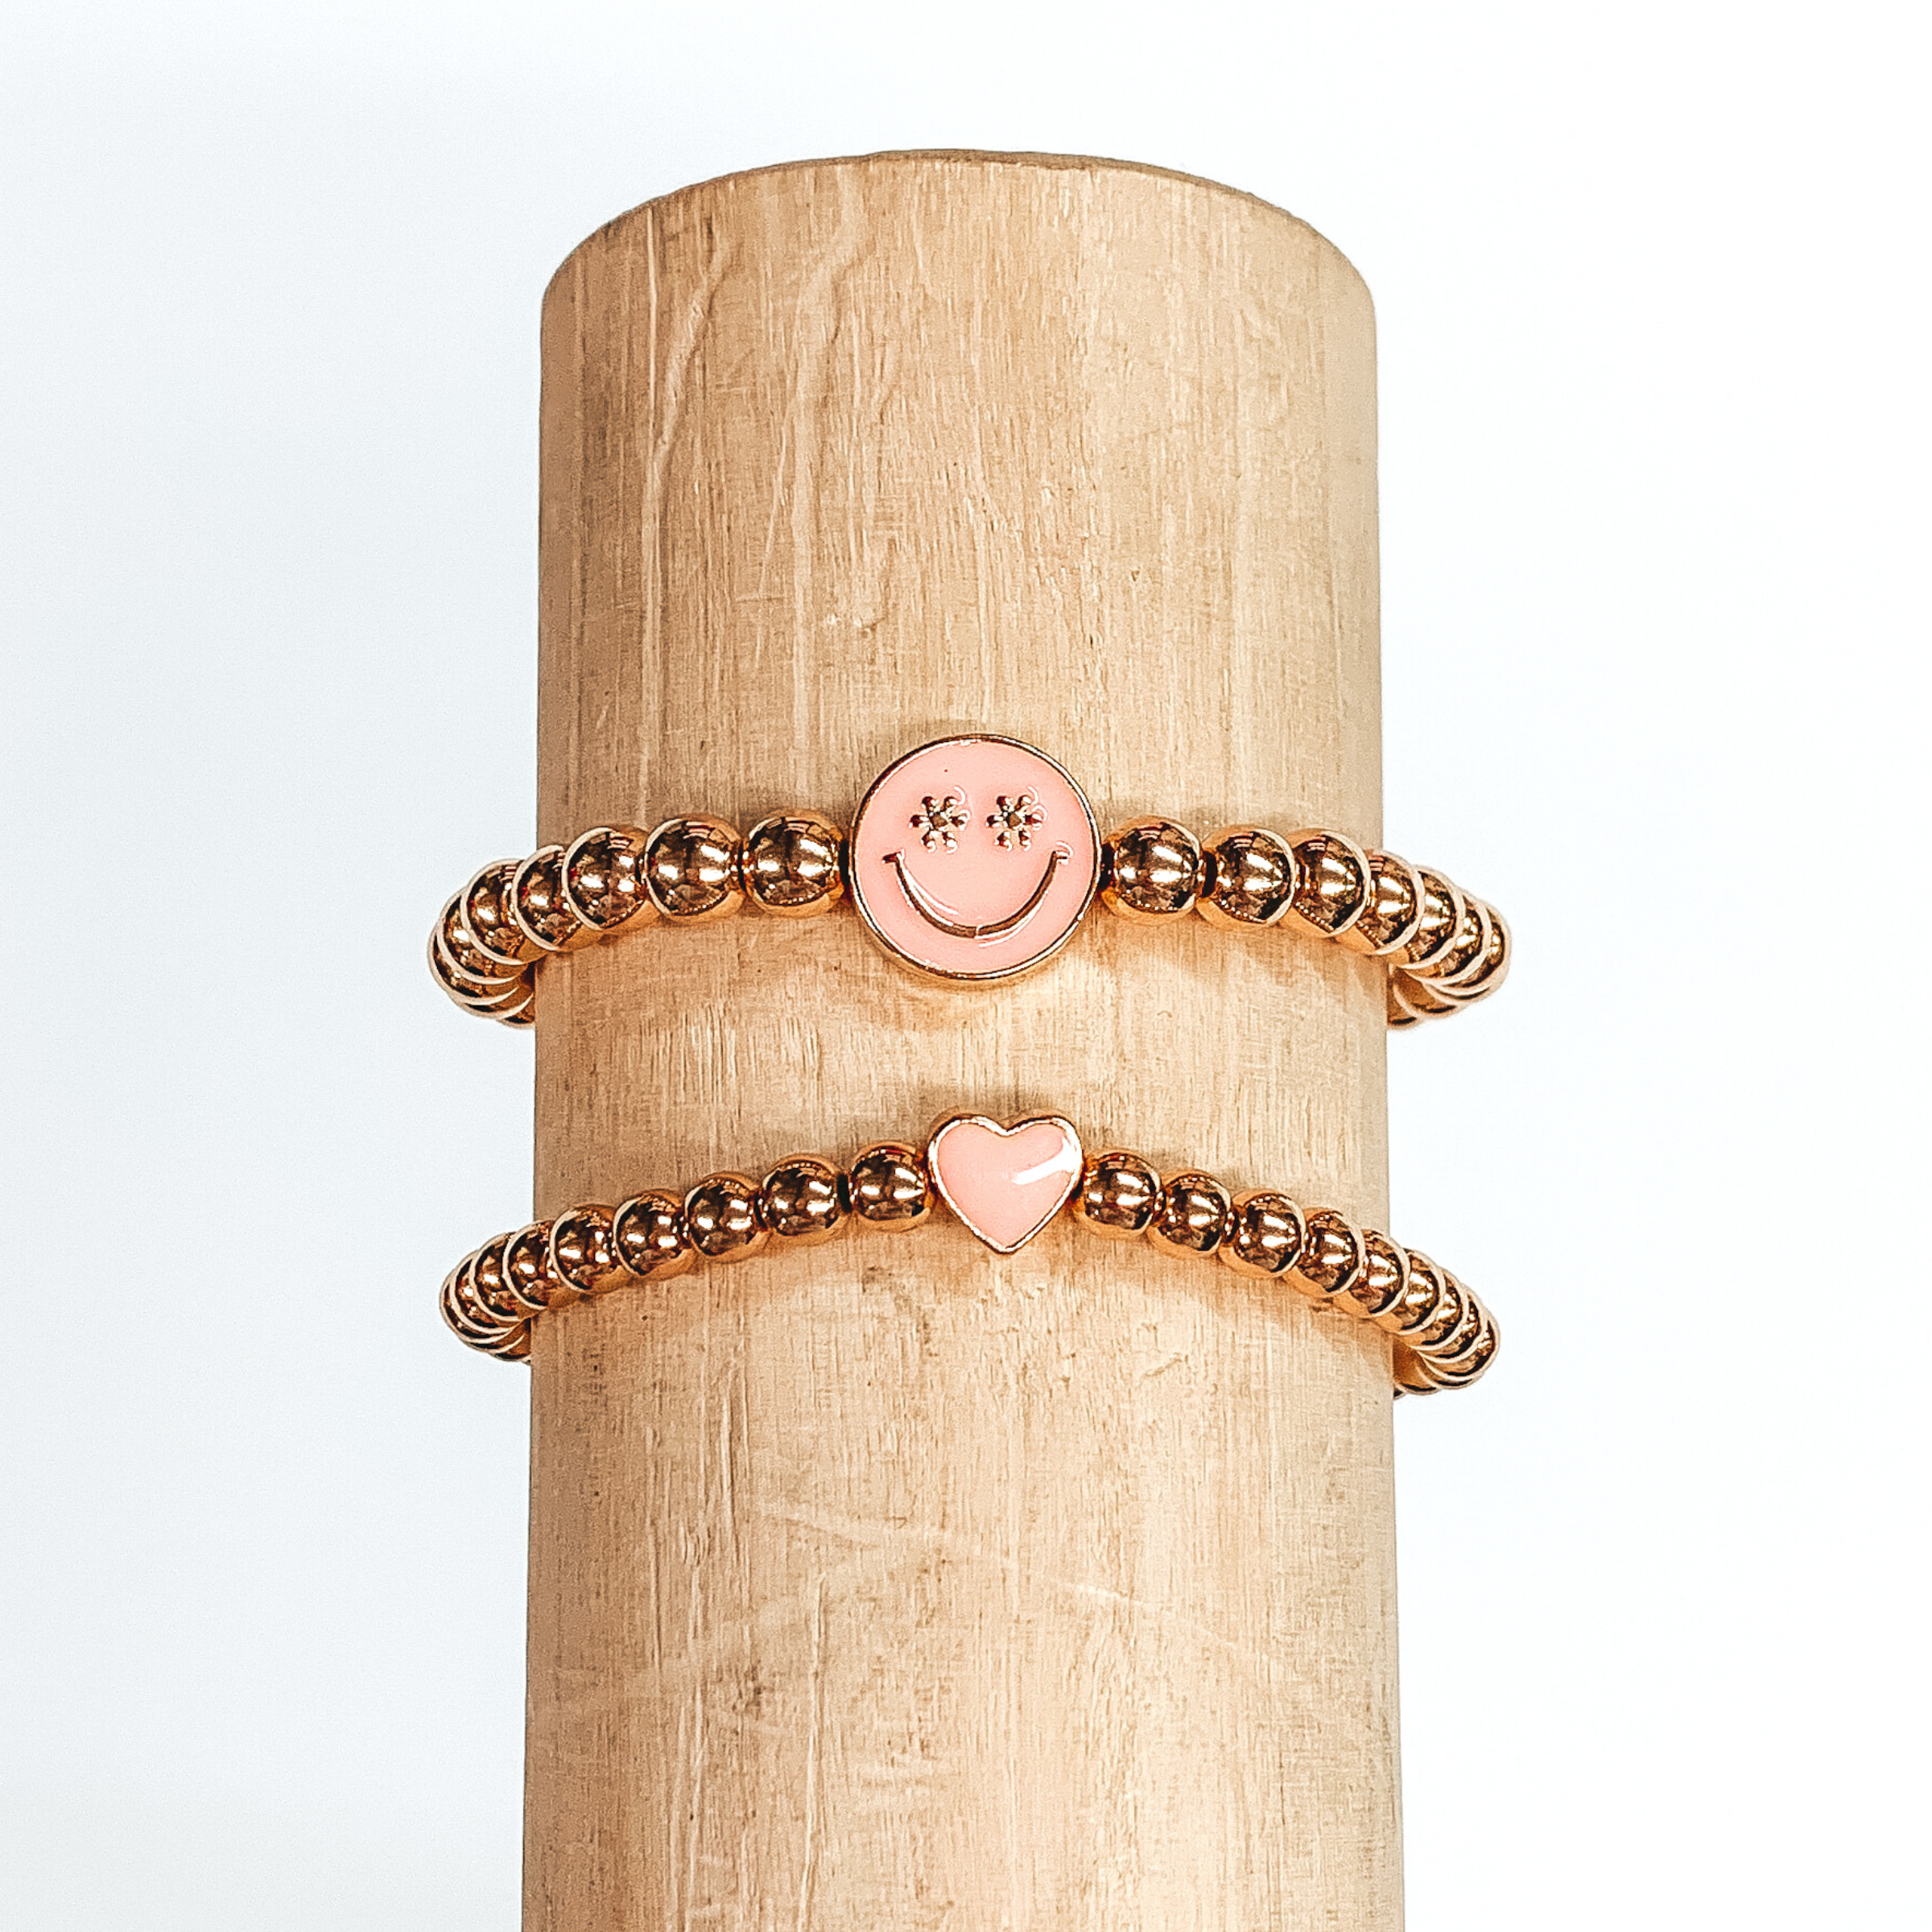 Two gold beaded bracelets. One bracelet has a tiny heart charm colored baby pink. The other bracelet has a circle charm that is colored baby pink with a smiley face in gold in the center. The eyes of the smiley face are tiny flowers. These two bracelets are pictured on a wood bracelet holder on a white background. 